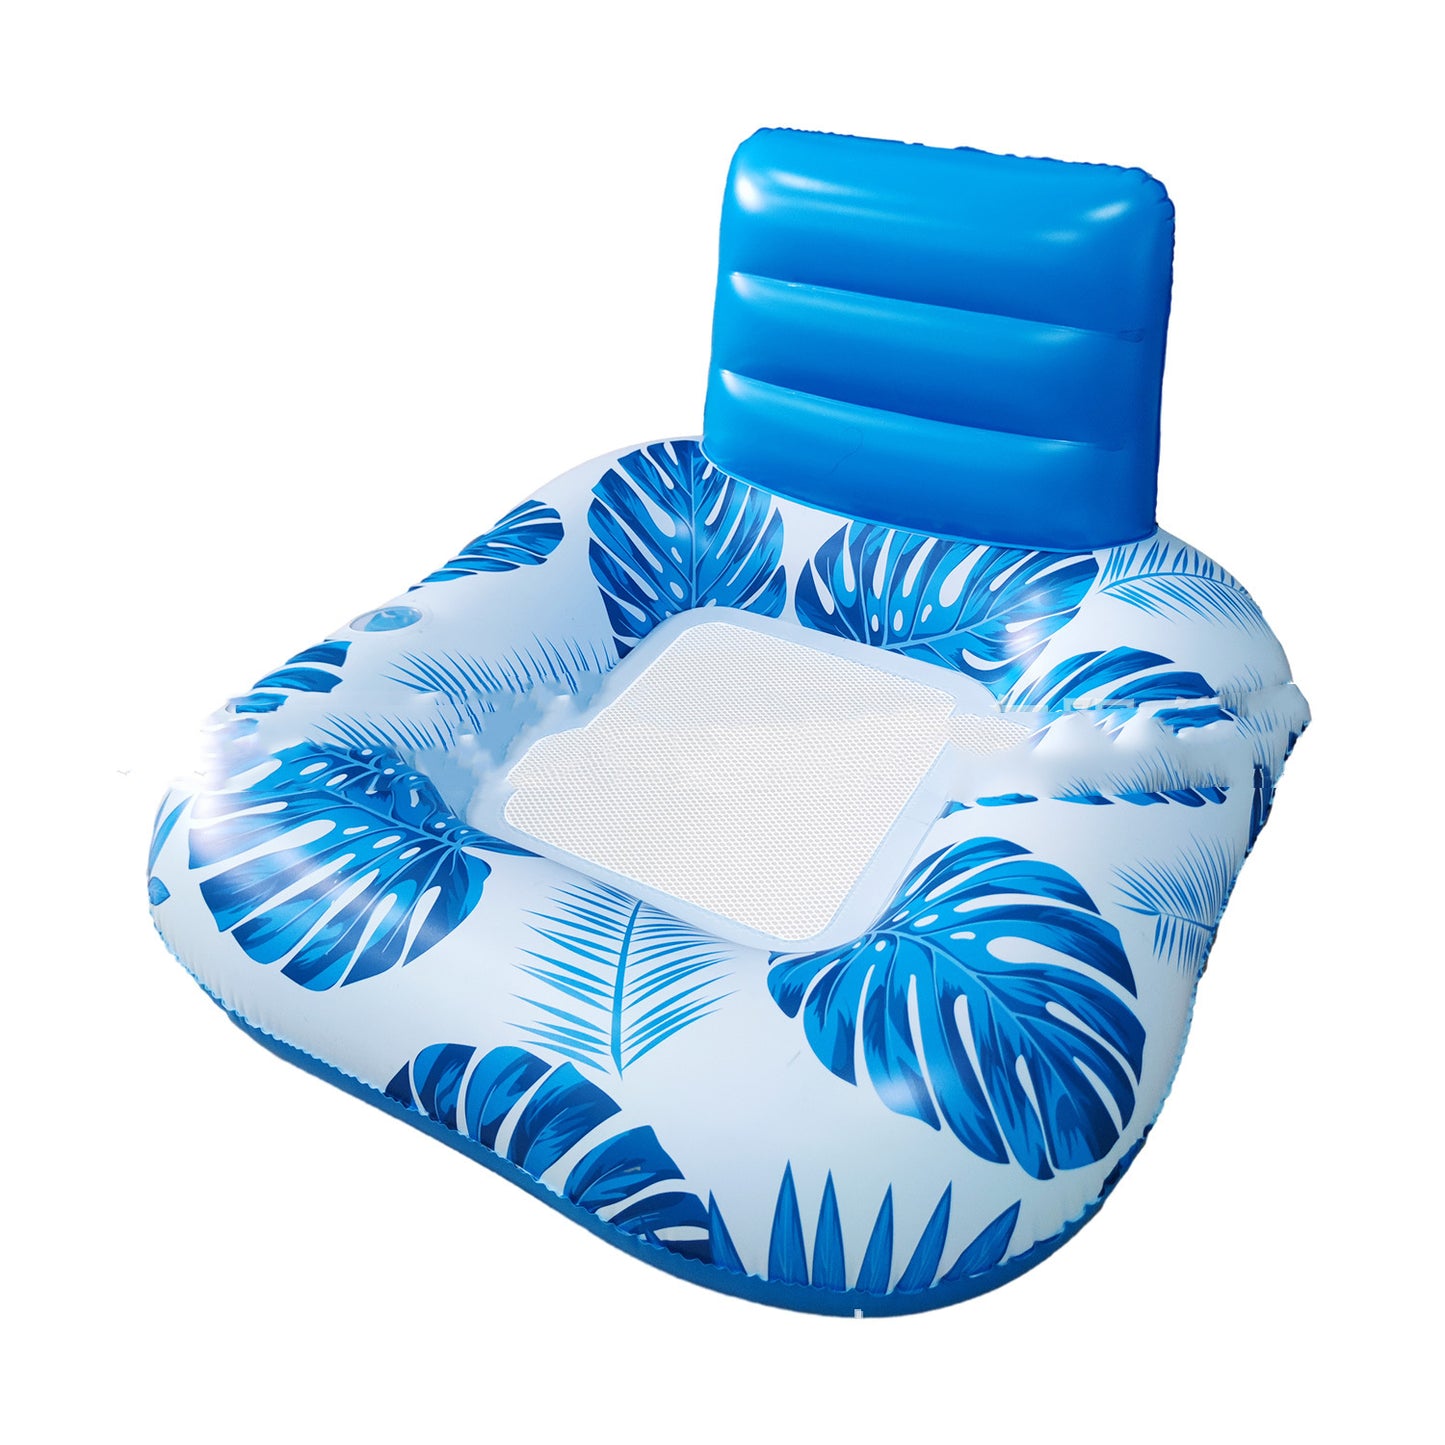 Inflatable Water Floating Seat Swim Ring Float